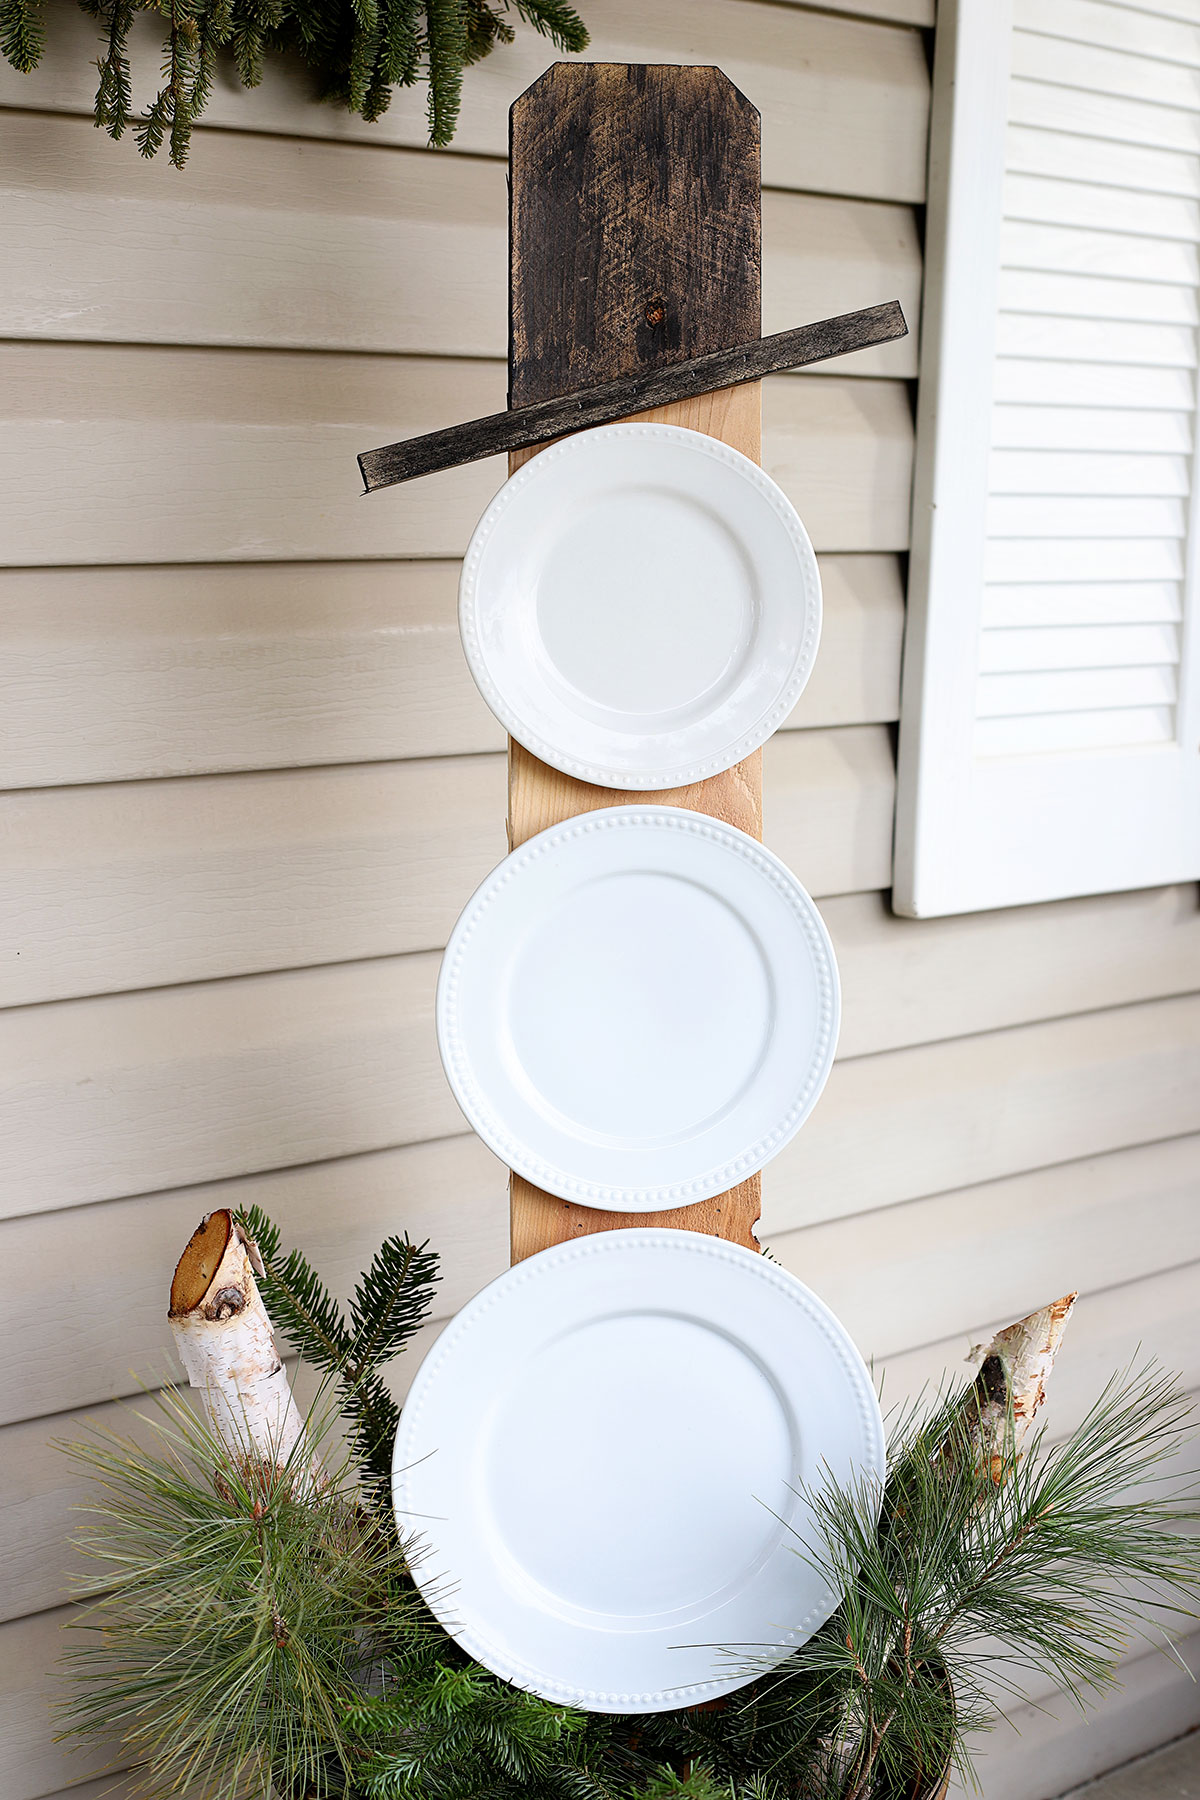 Snowman made from repurposed white plates. Used as porch decor for after Christmas.